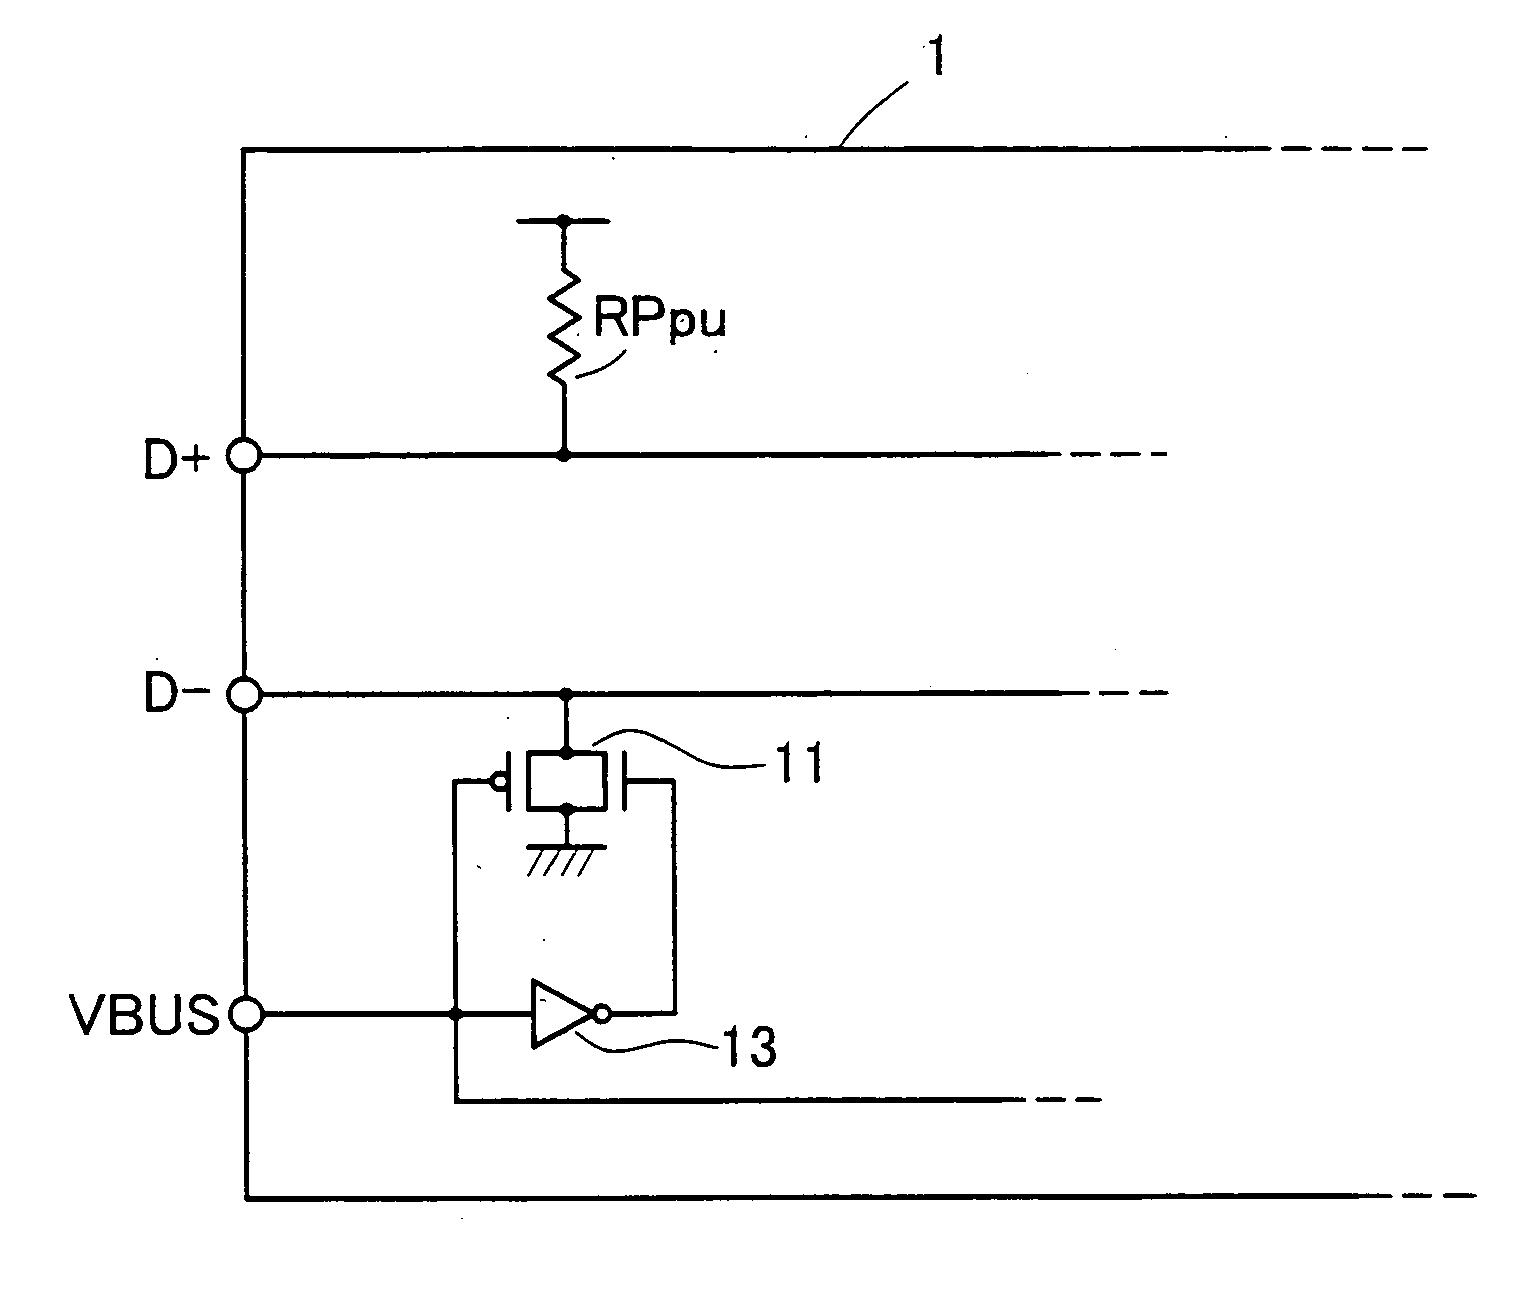 USB upstream device, USB connector, and USB cable